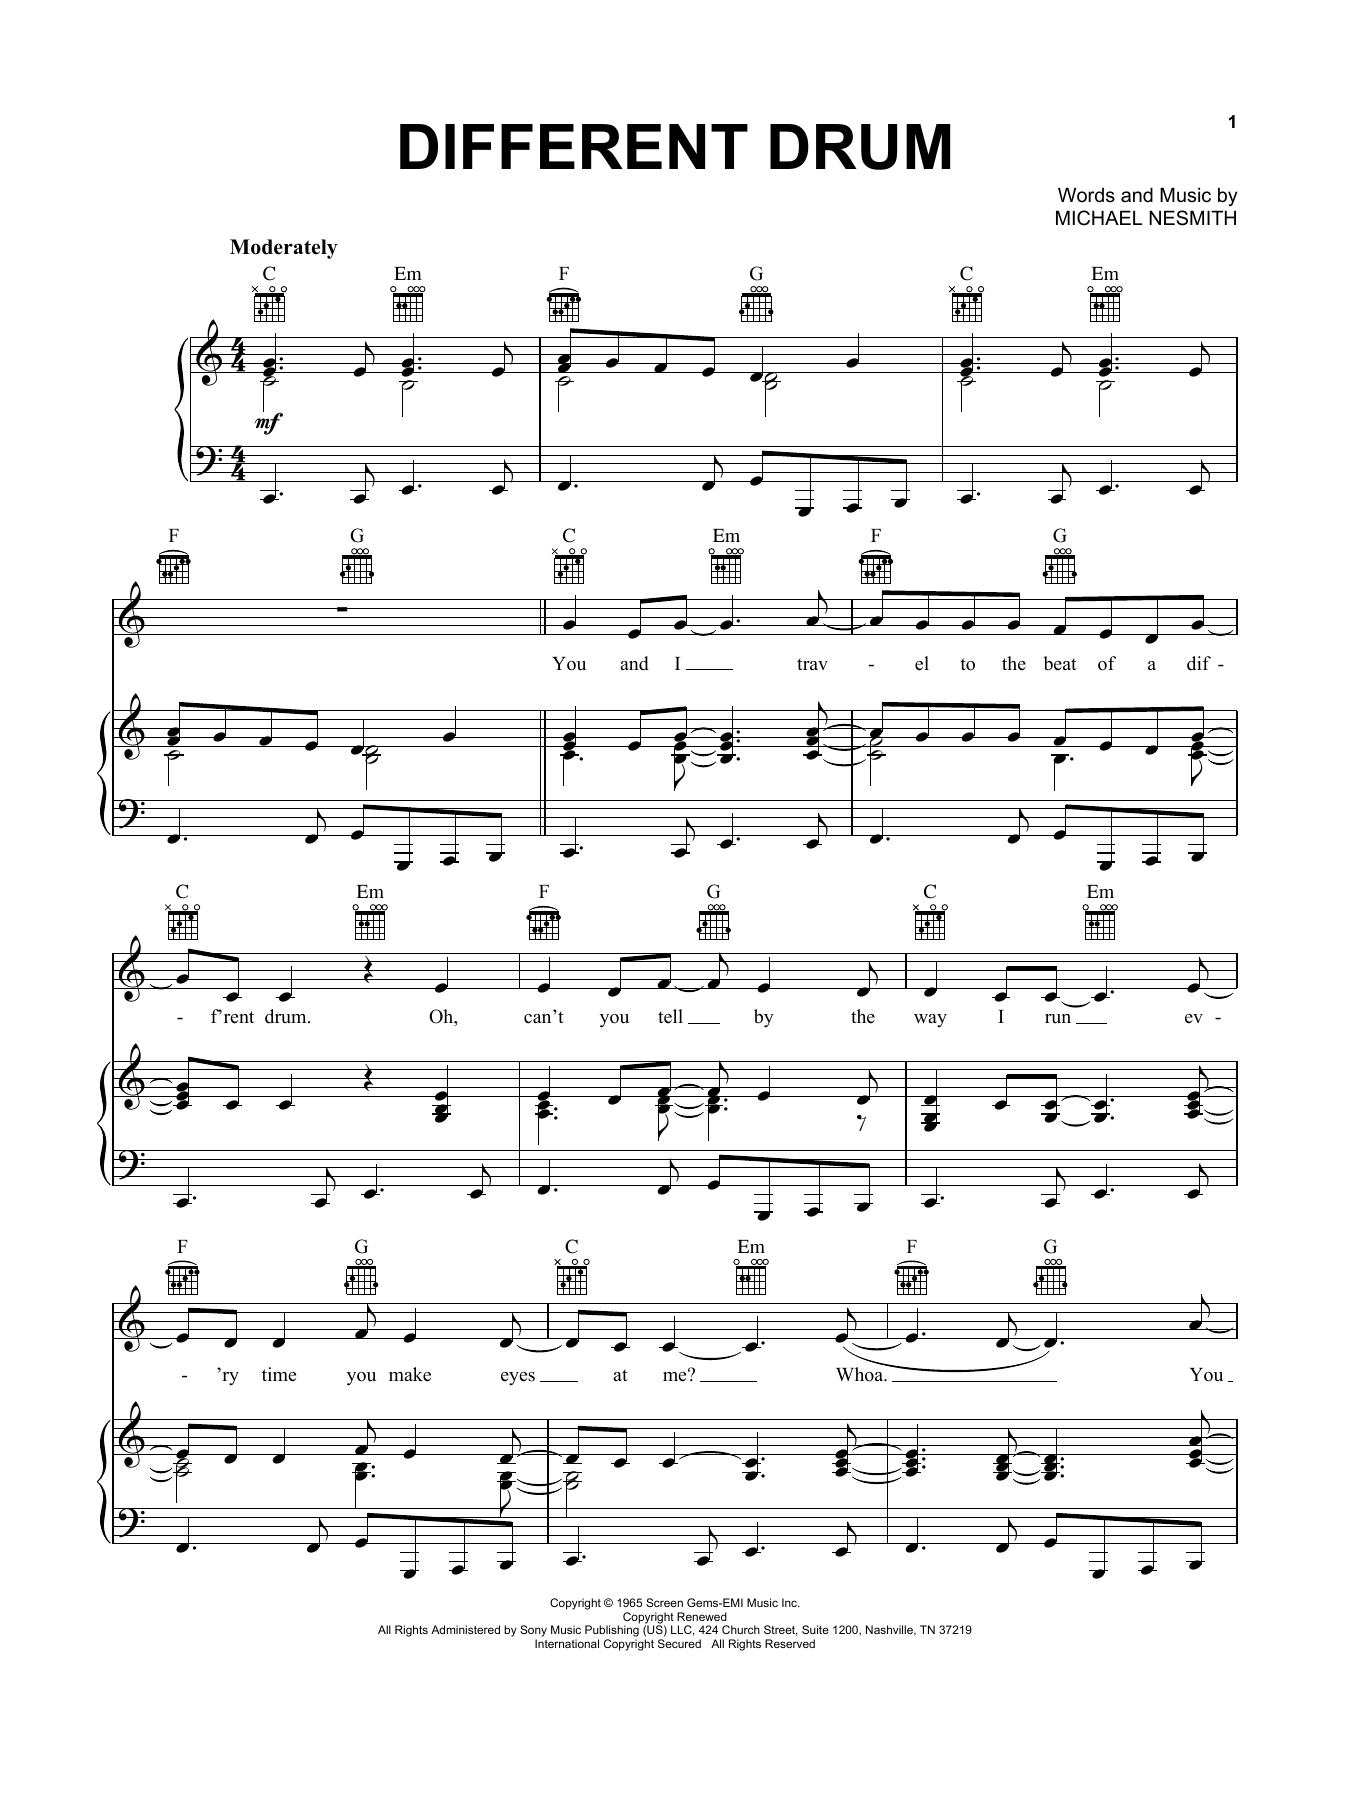 Download Stone Poneys and Linda Ronstadt Different Drum Sheet Music